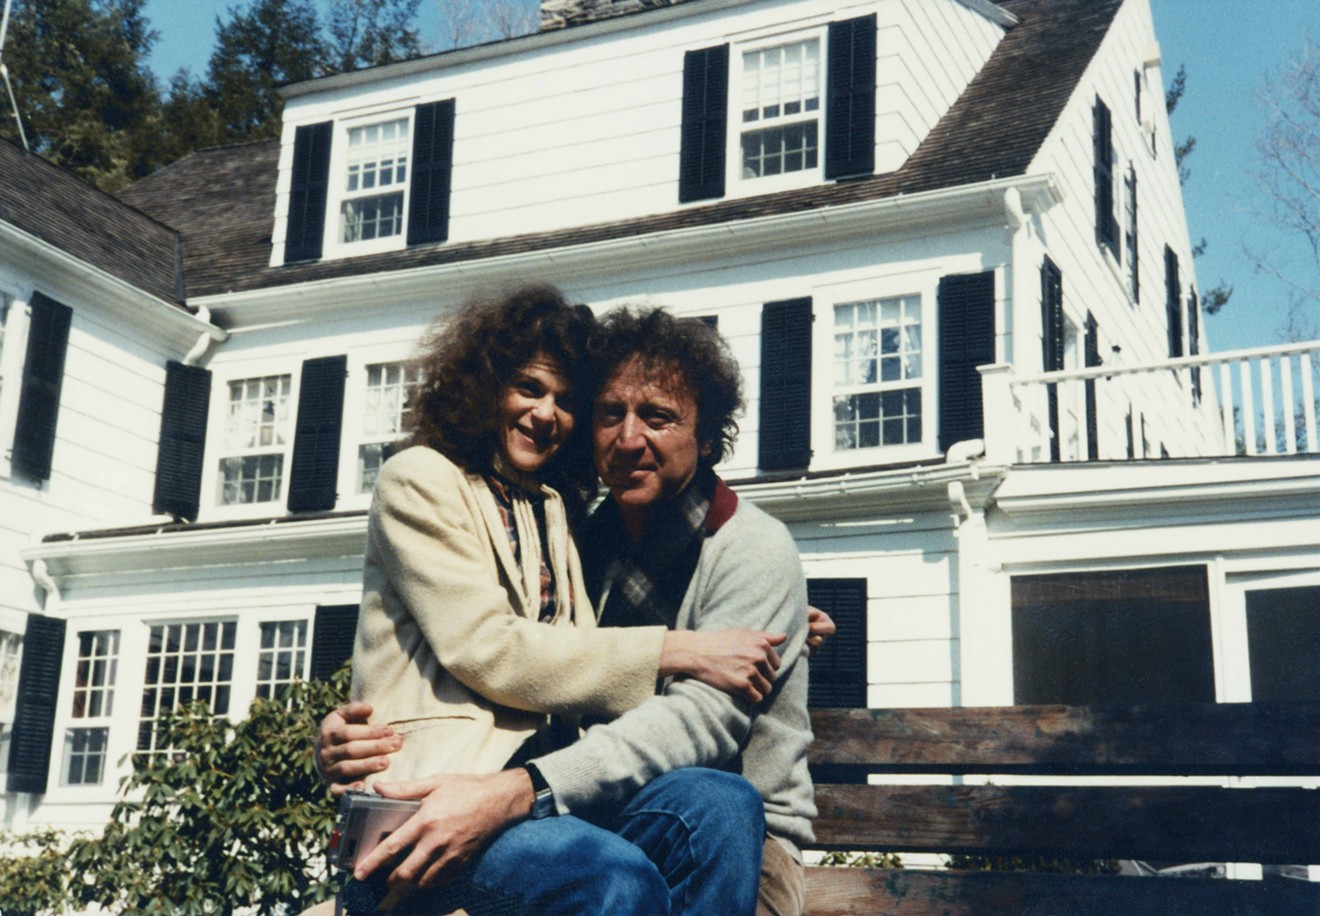 Saturday Night Live dynamo Gilda Radner (left), who found stability in a high-profile Hollywood marriage to Gene Wilder, is the subject of Lisa D'Apolito’s touching documentary Love, Gilda.